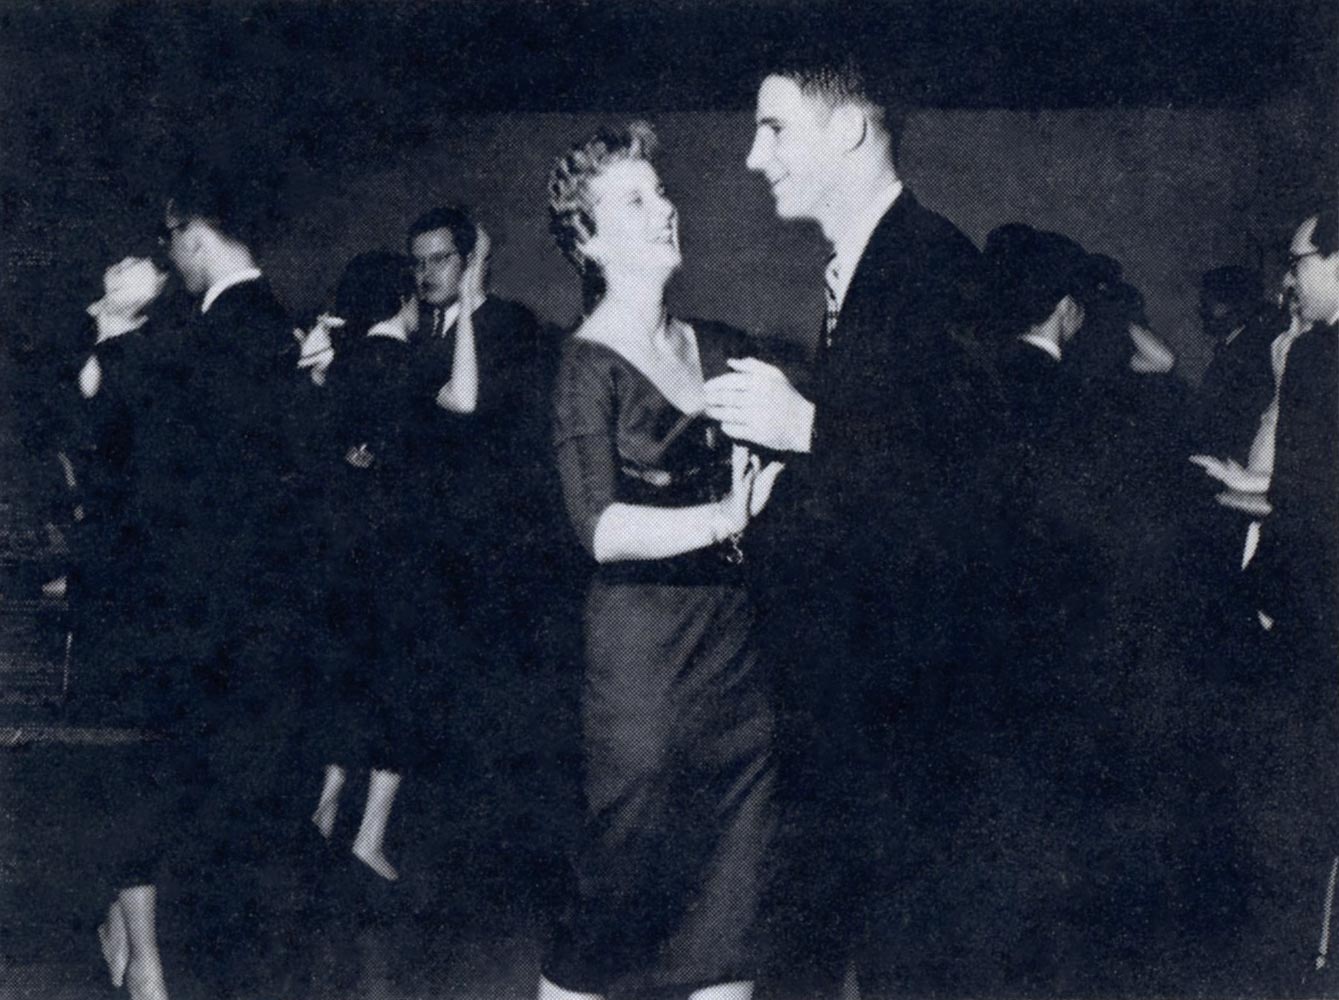 Black and white image of Blakeman dancing with another person